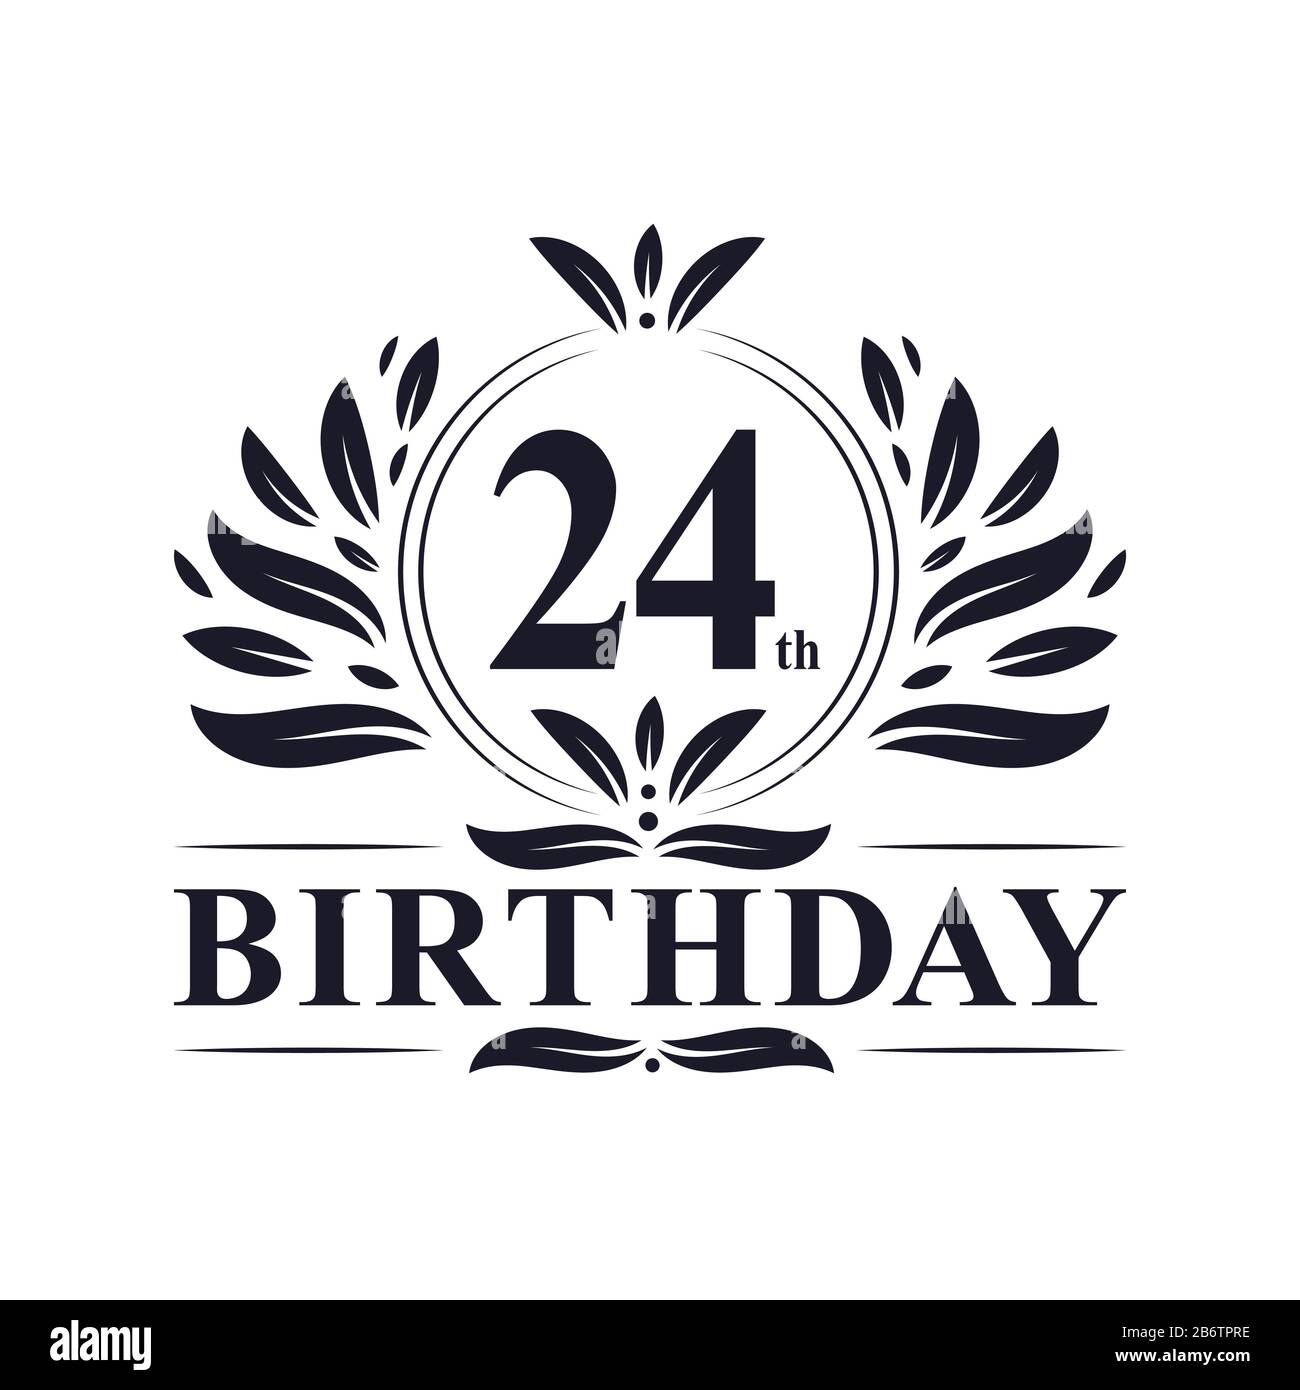 24th birthday Cut Out Stock Images & Pictures - Alamy